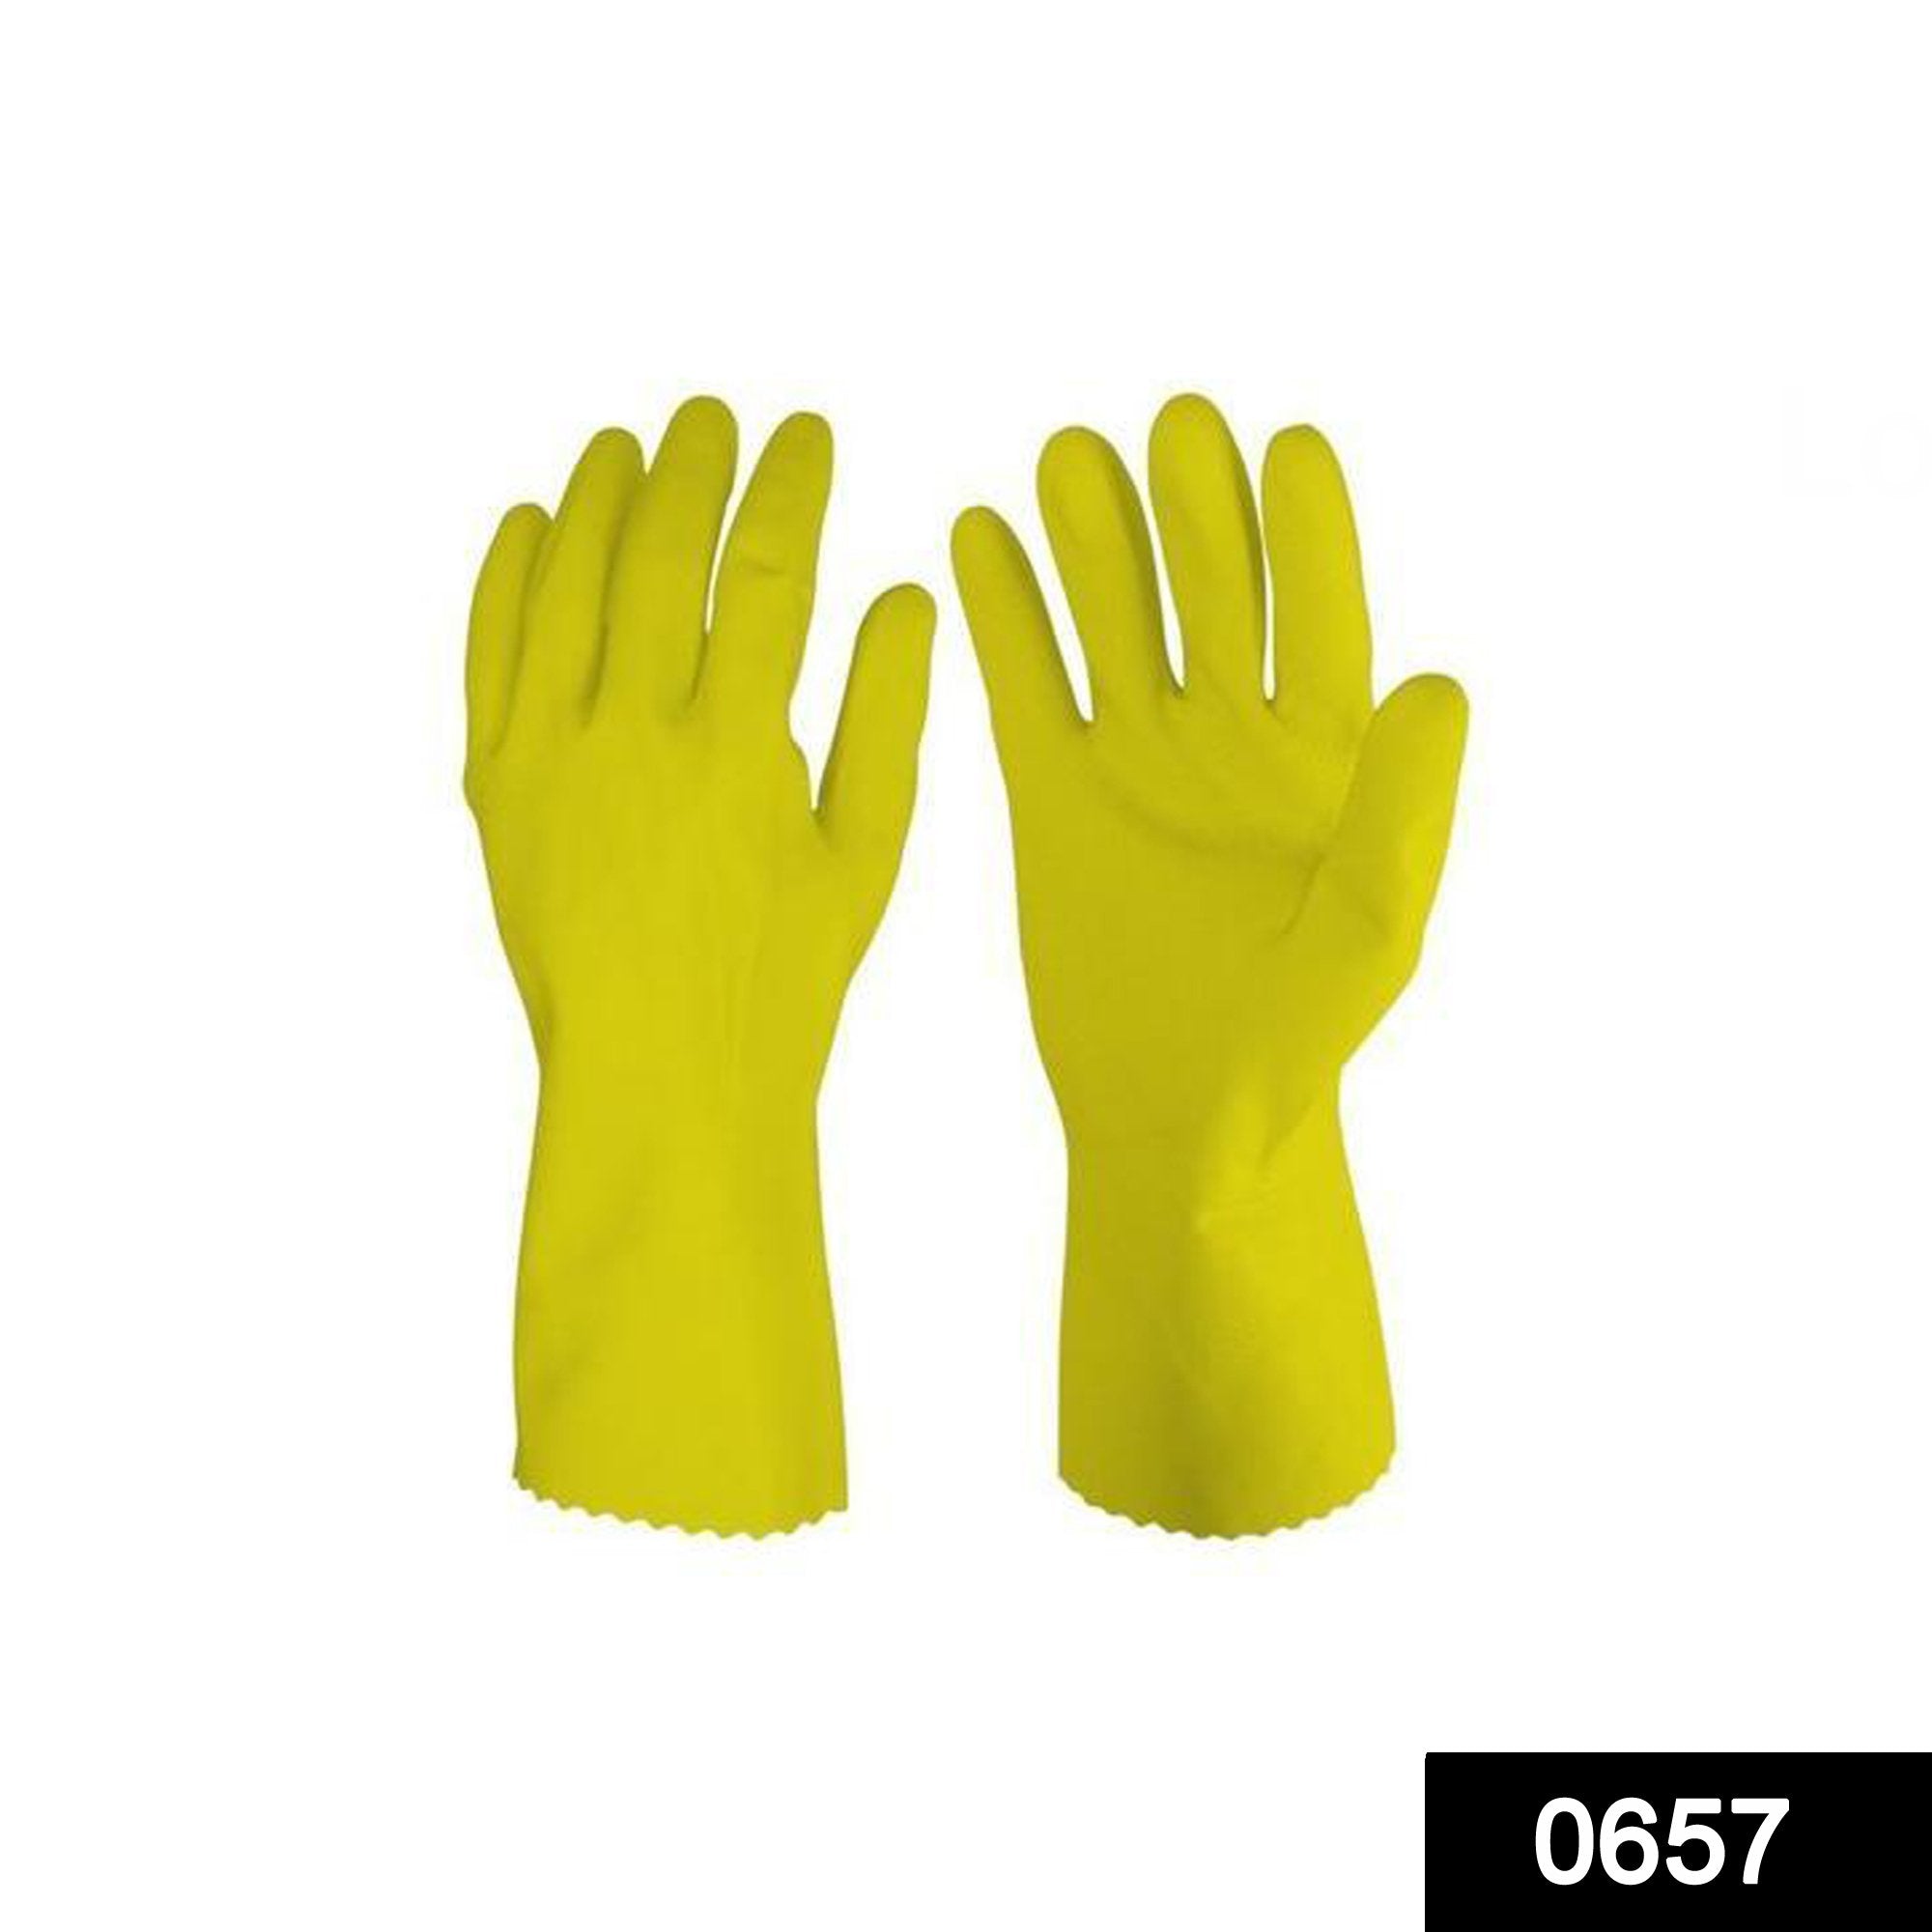 0657 - Cut Glove Reusable Rubber Hand Gloves (Natural) - 1 pc - SkyShopy